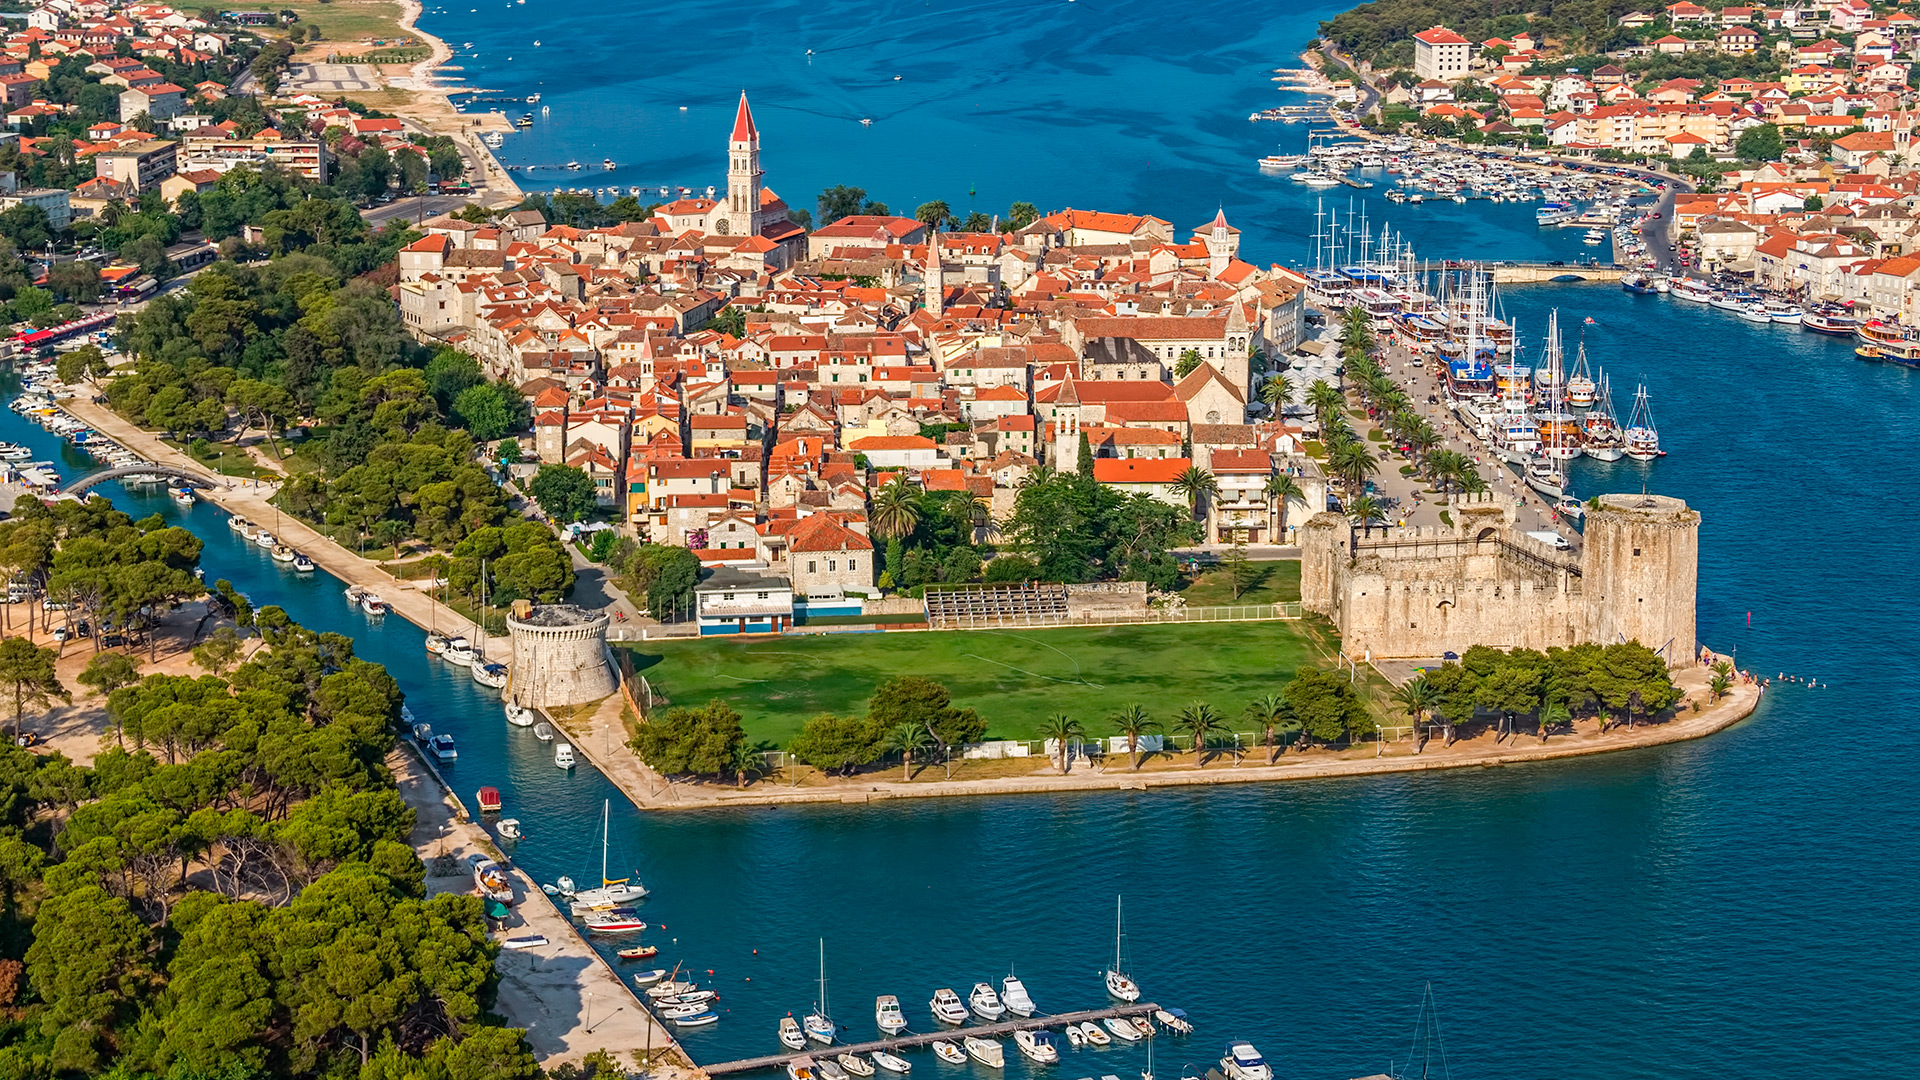 Panorama of the historical part of the city, Trogir, Croatia